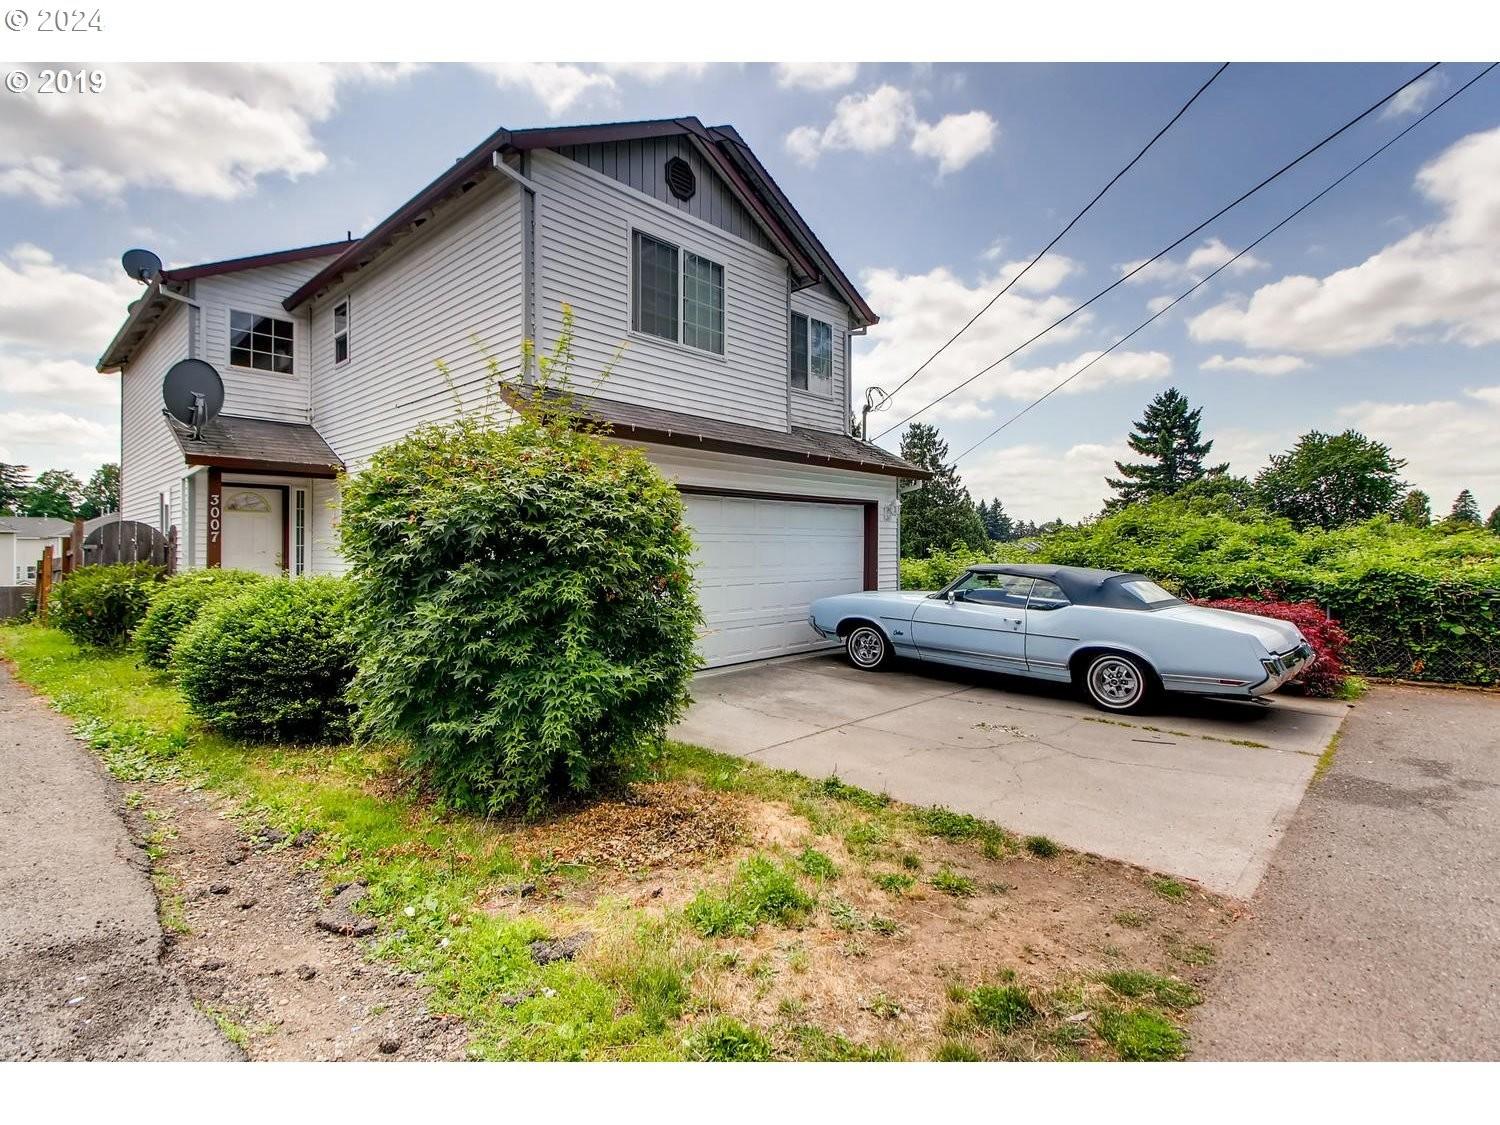 Property Image for 3007 Se 92nd Ave